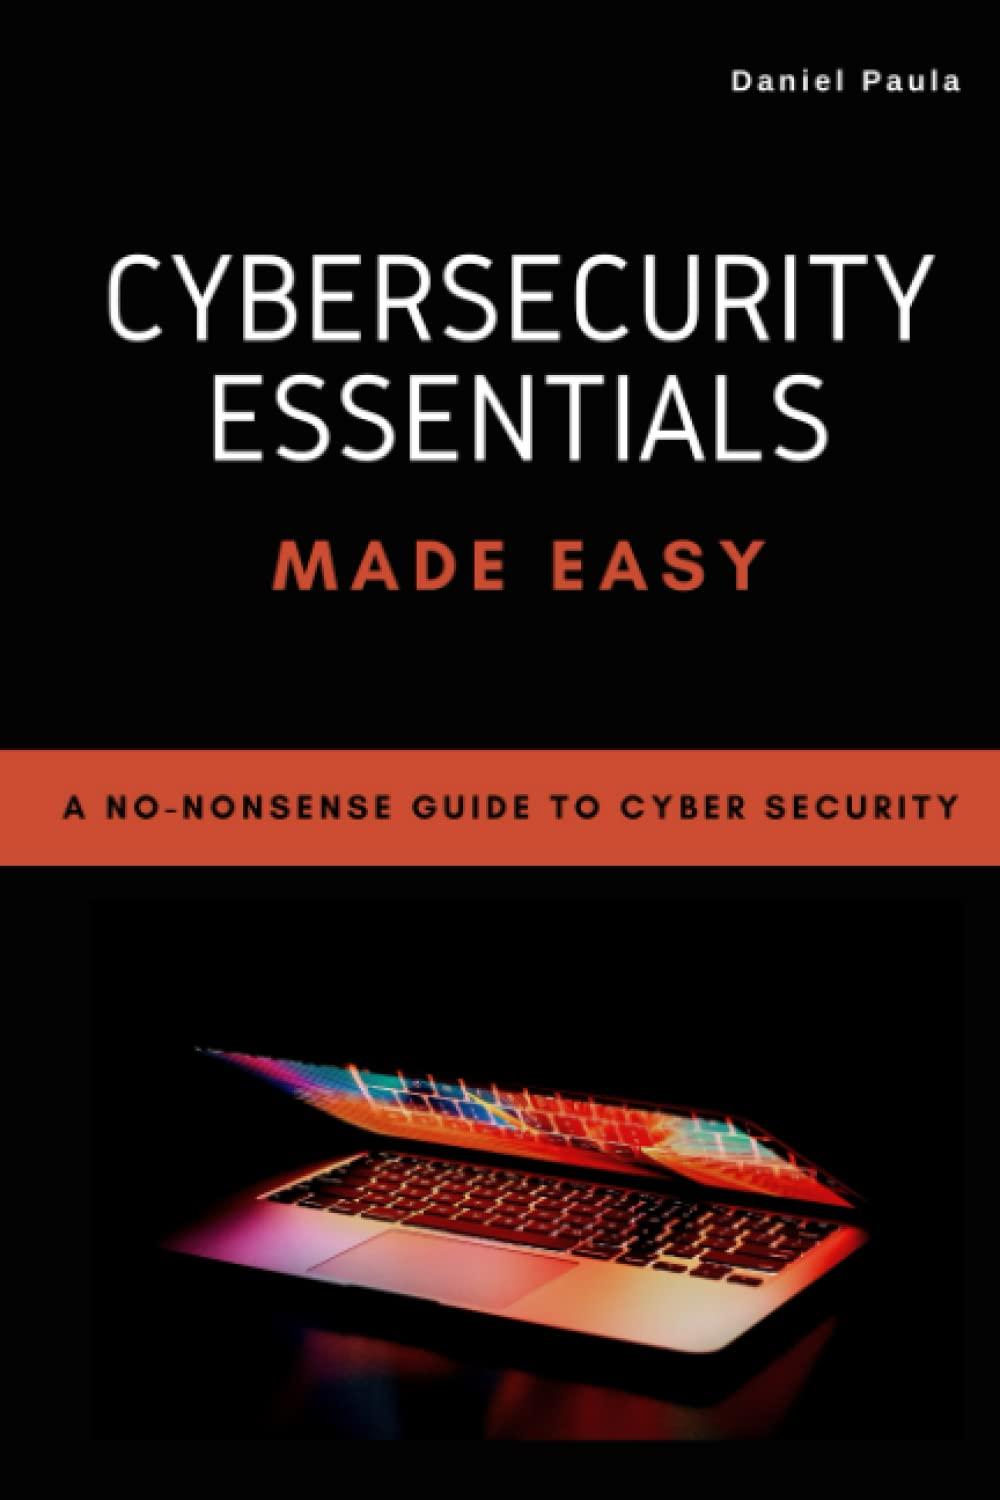 cybersecurity essentials made easy a no nonsense guide to cyber security 1st edition daniel paula b0bshwb7wz,